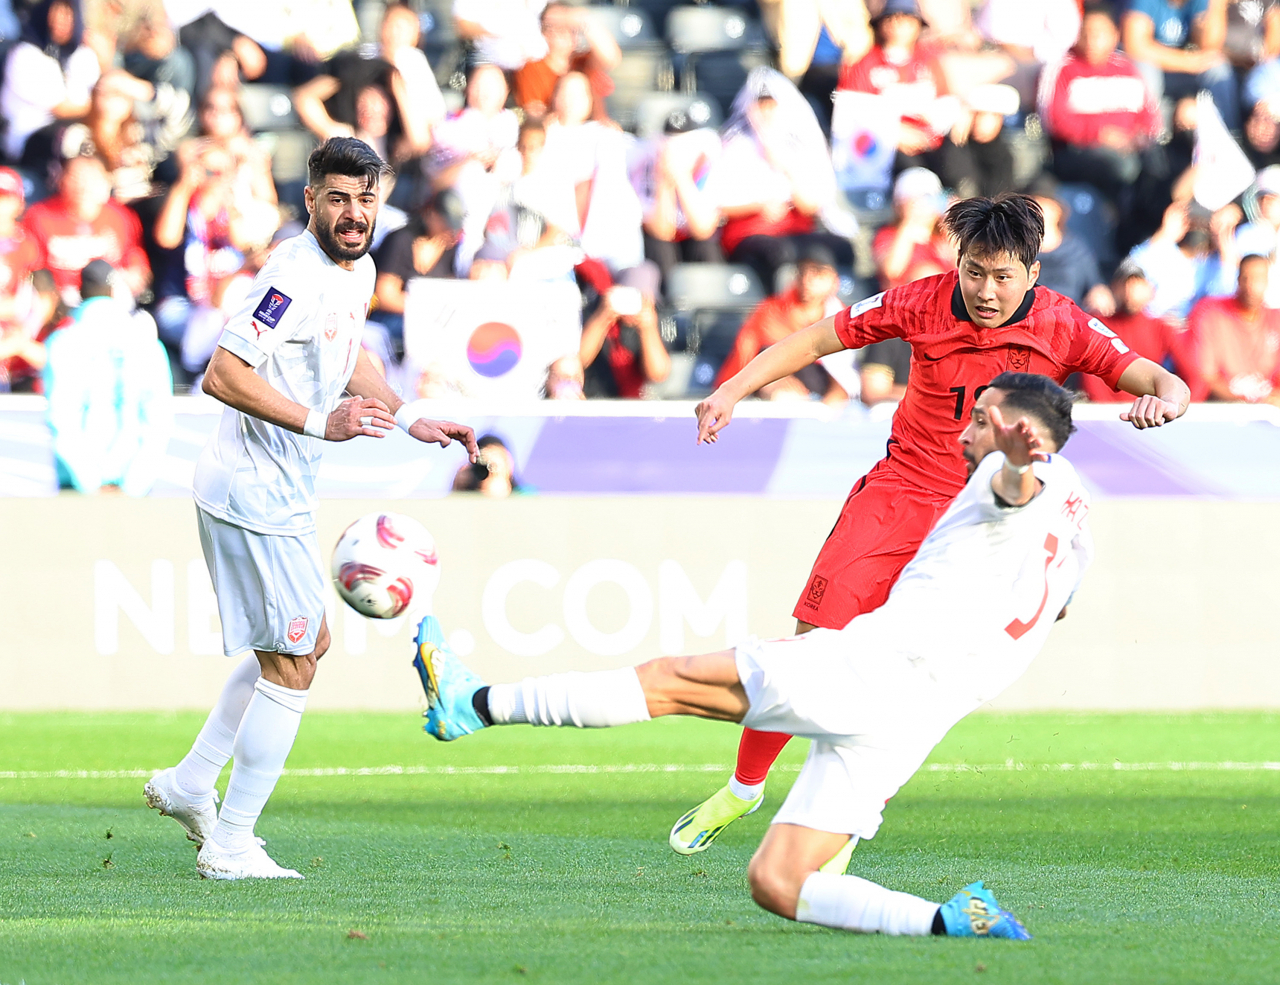 Midfielder Lee Kang-in scores a goal for South Korea against Bahrain in the first match of the Asian Football Confederation Asian Cup in Qatar on Monday. (Yonhap)